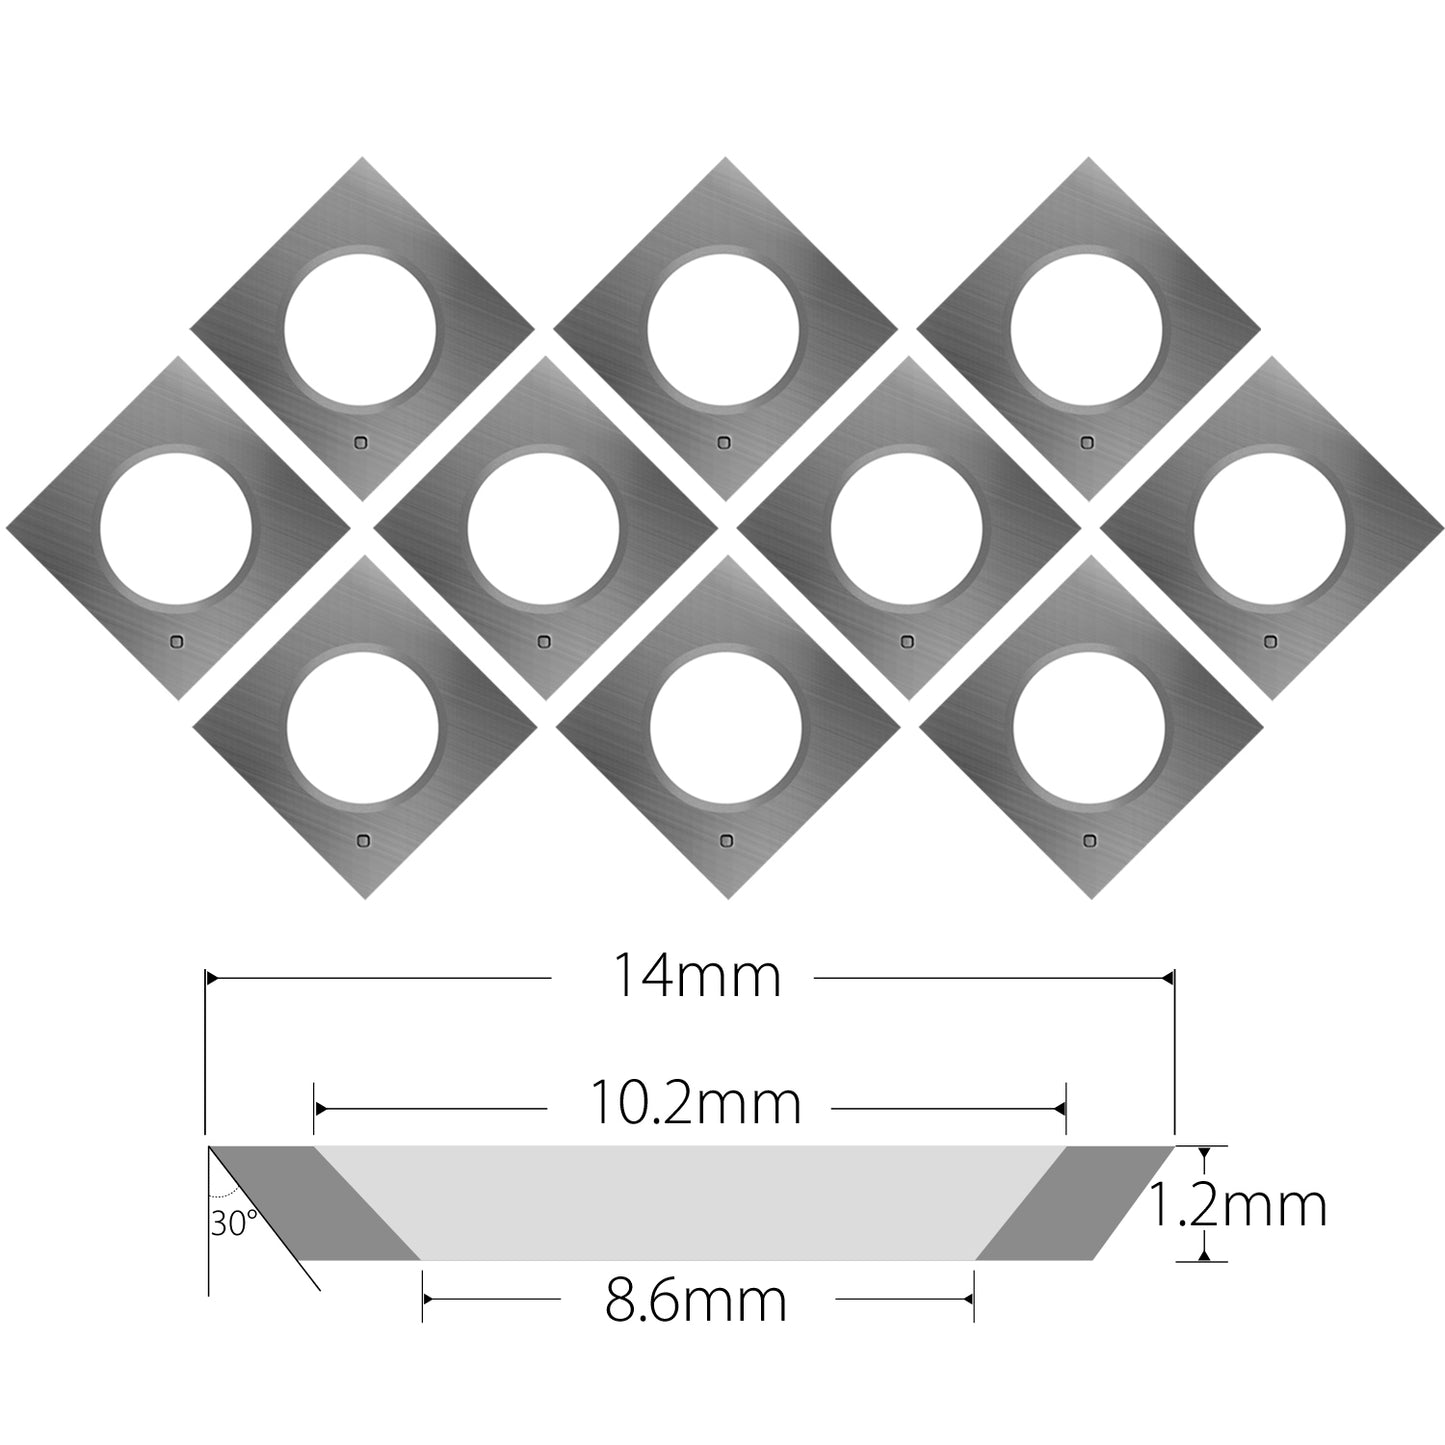 Woodworking Square 14×14×1.2 mm-30° Carbide Inserts Knife for Cutter Heads